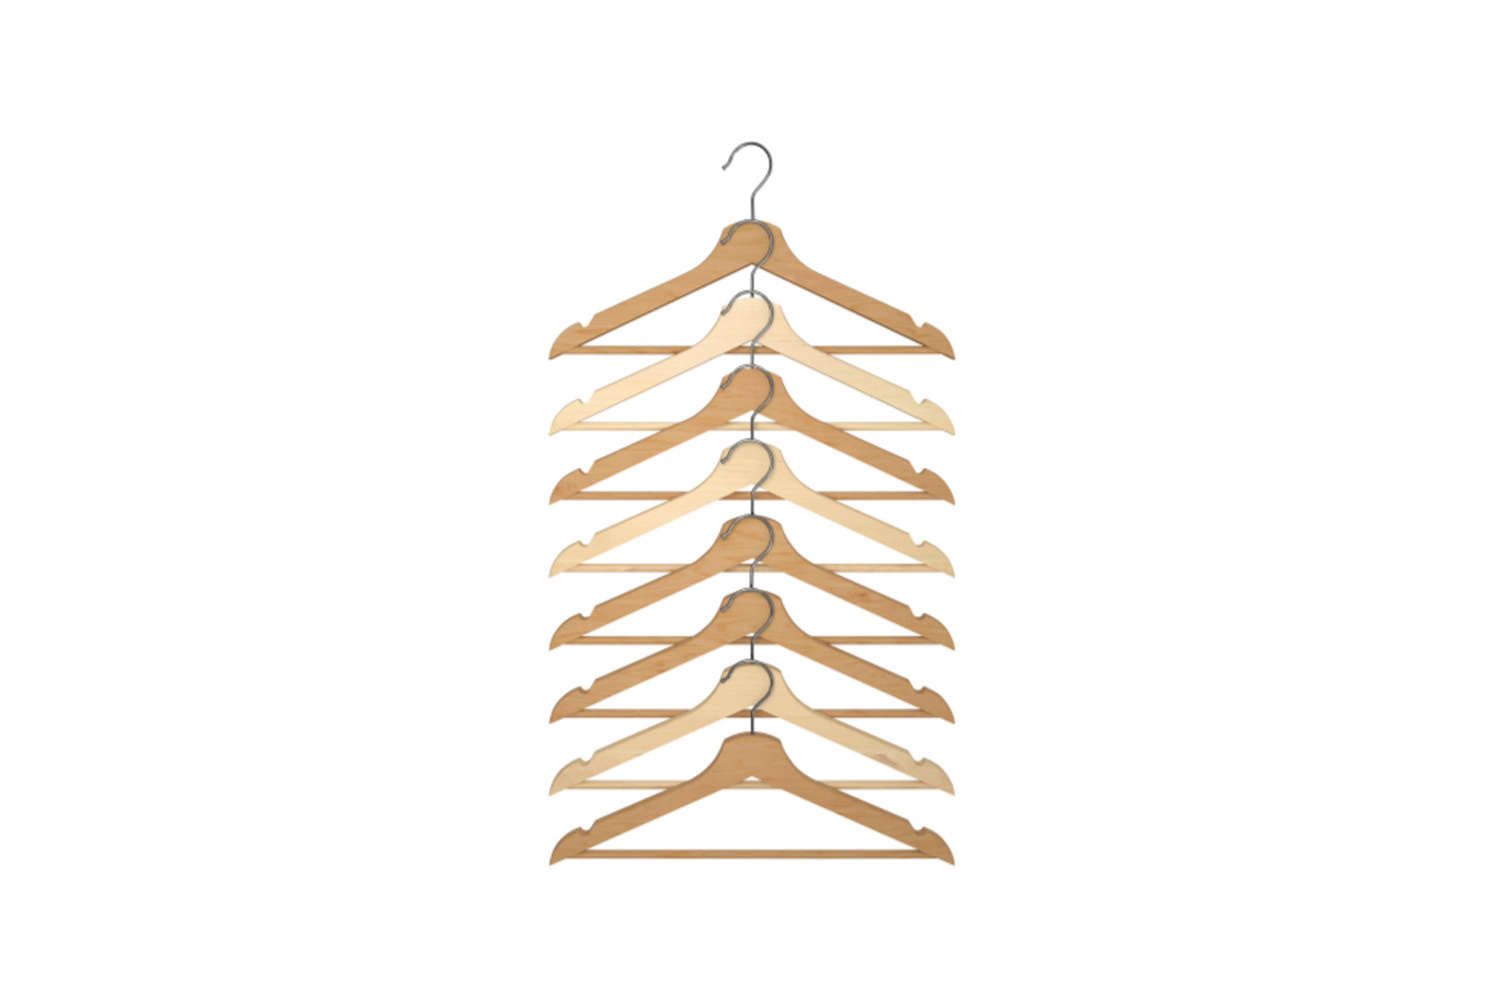 Get rid of all those flimsy wire hangers and upgrade to a uniform wooden set. An 8-pack of Bumerang Hangers is just $7.99.